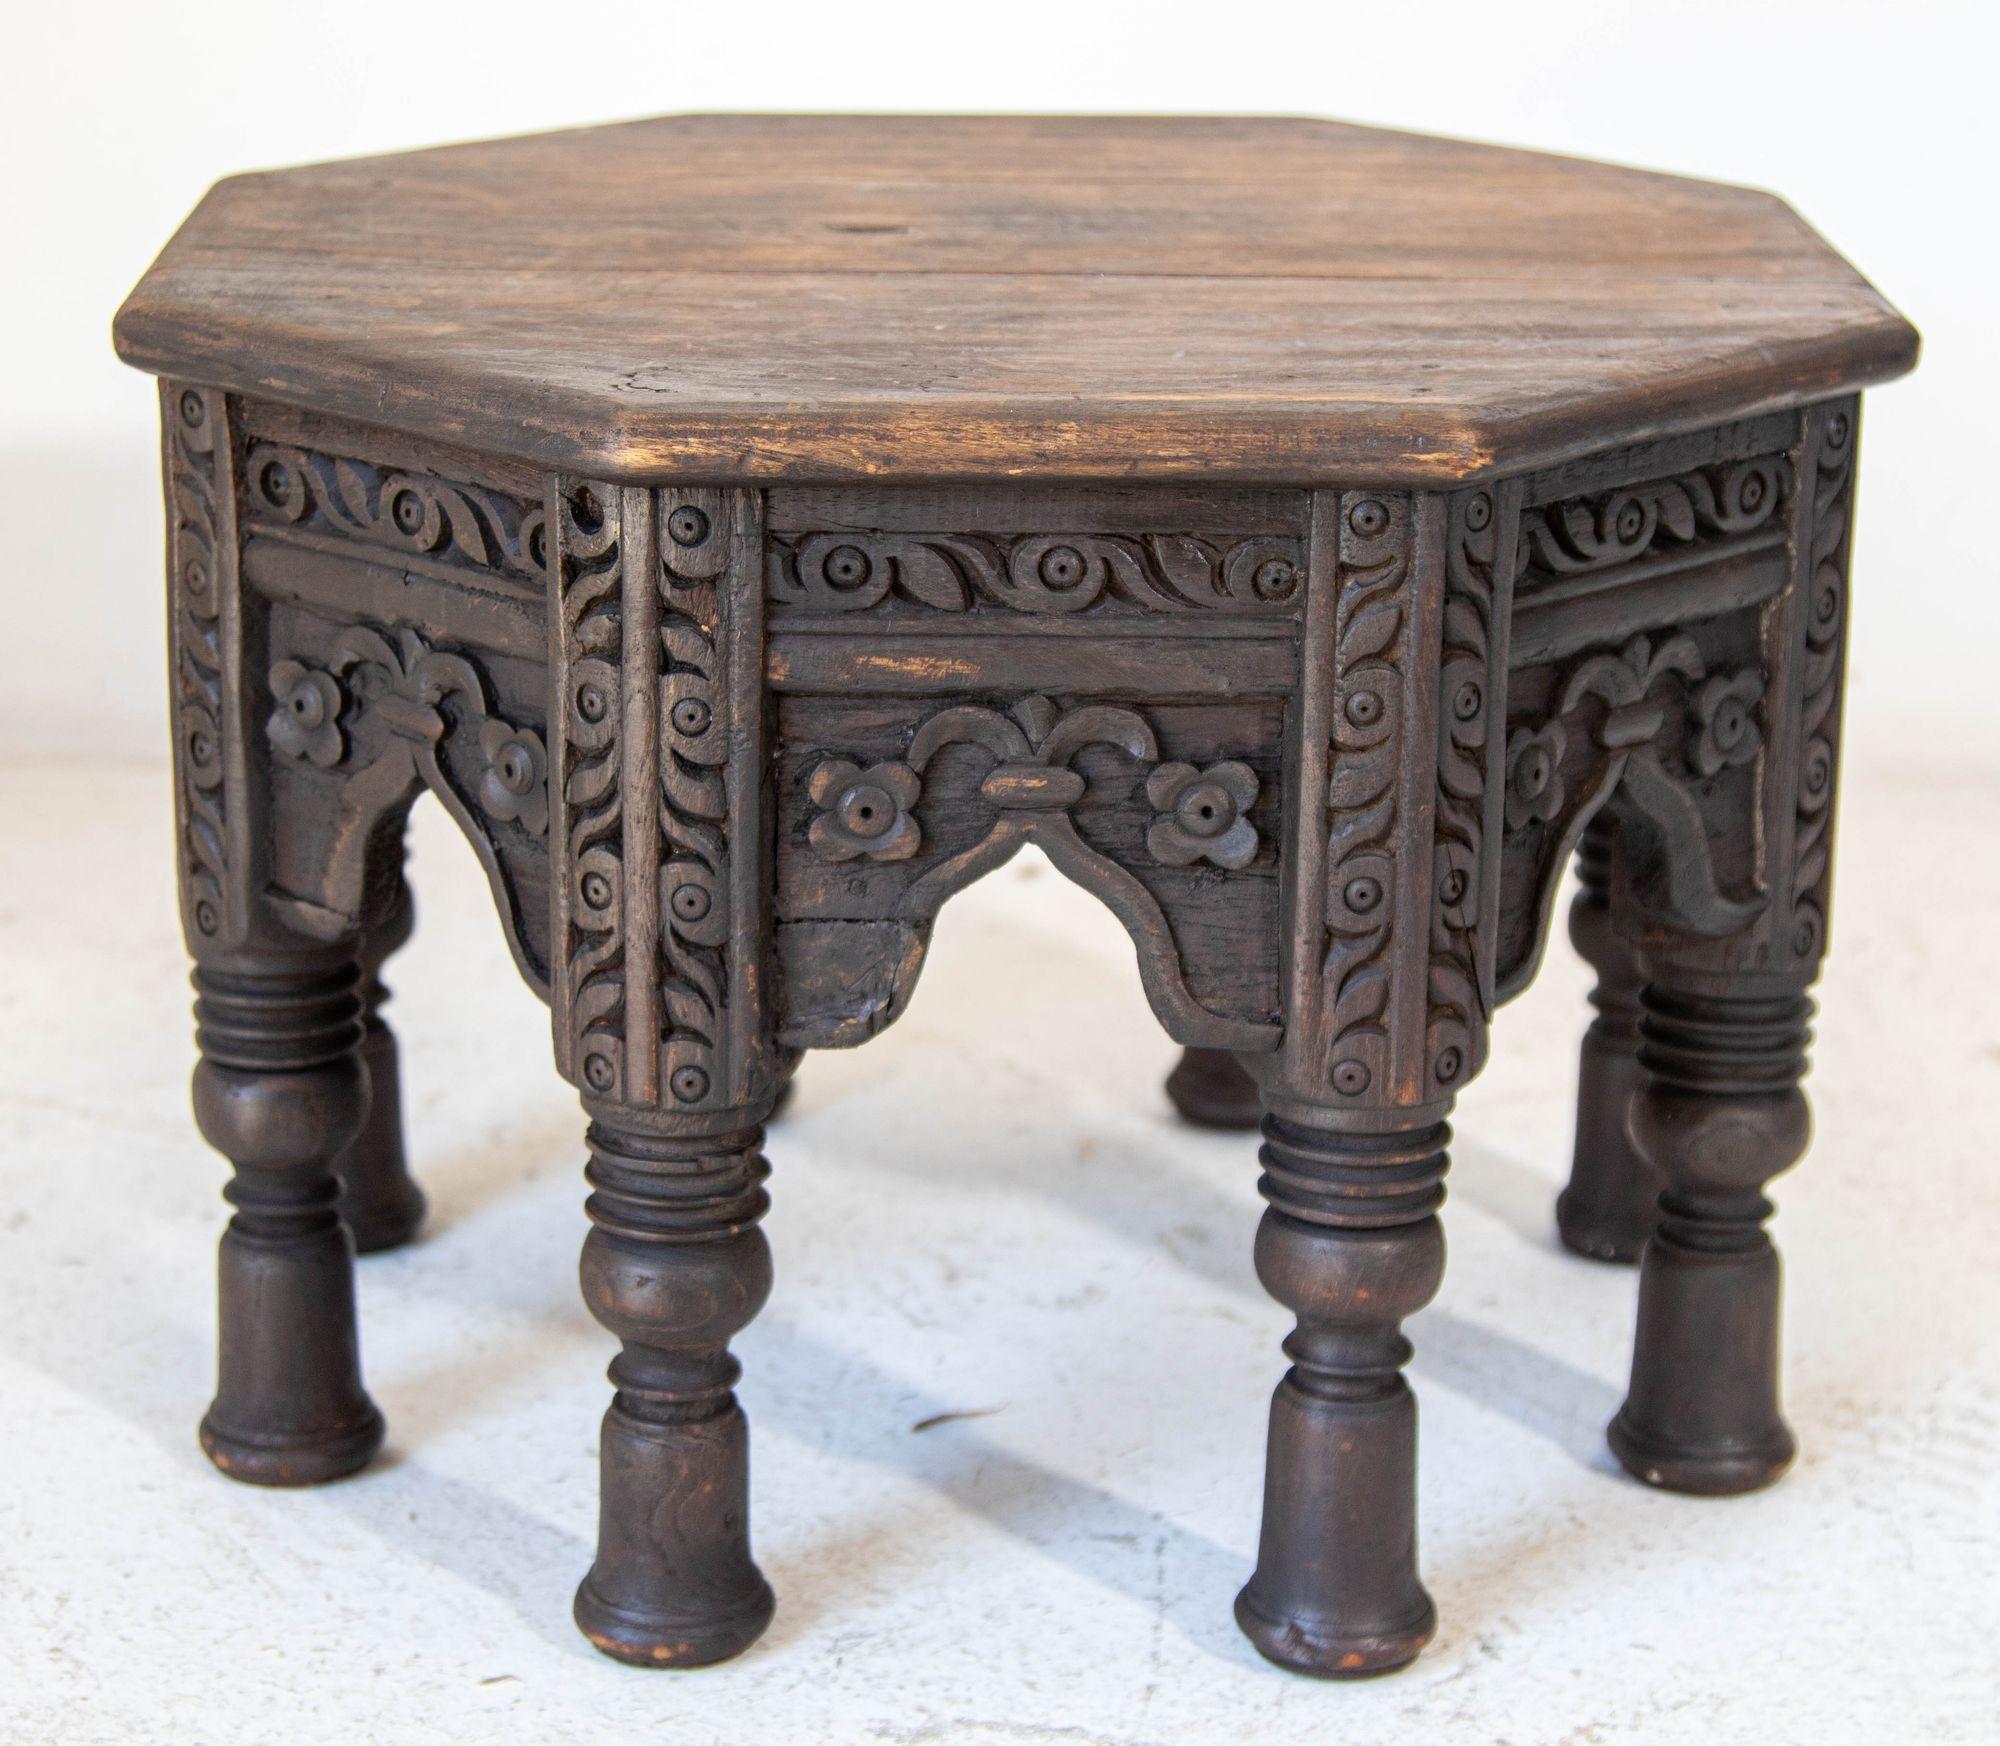 Antique 19th c. Octagonal Moorish Side Table Hand-carved with geometric design.
Beautiful octagonal, ebonized rustic wood low side table with an intricately carved pattern on the sides.
Moorish style side table made of richly patinated oak with